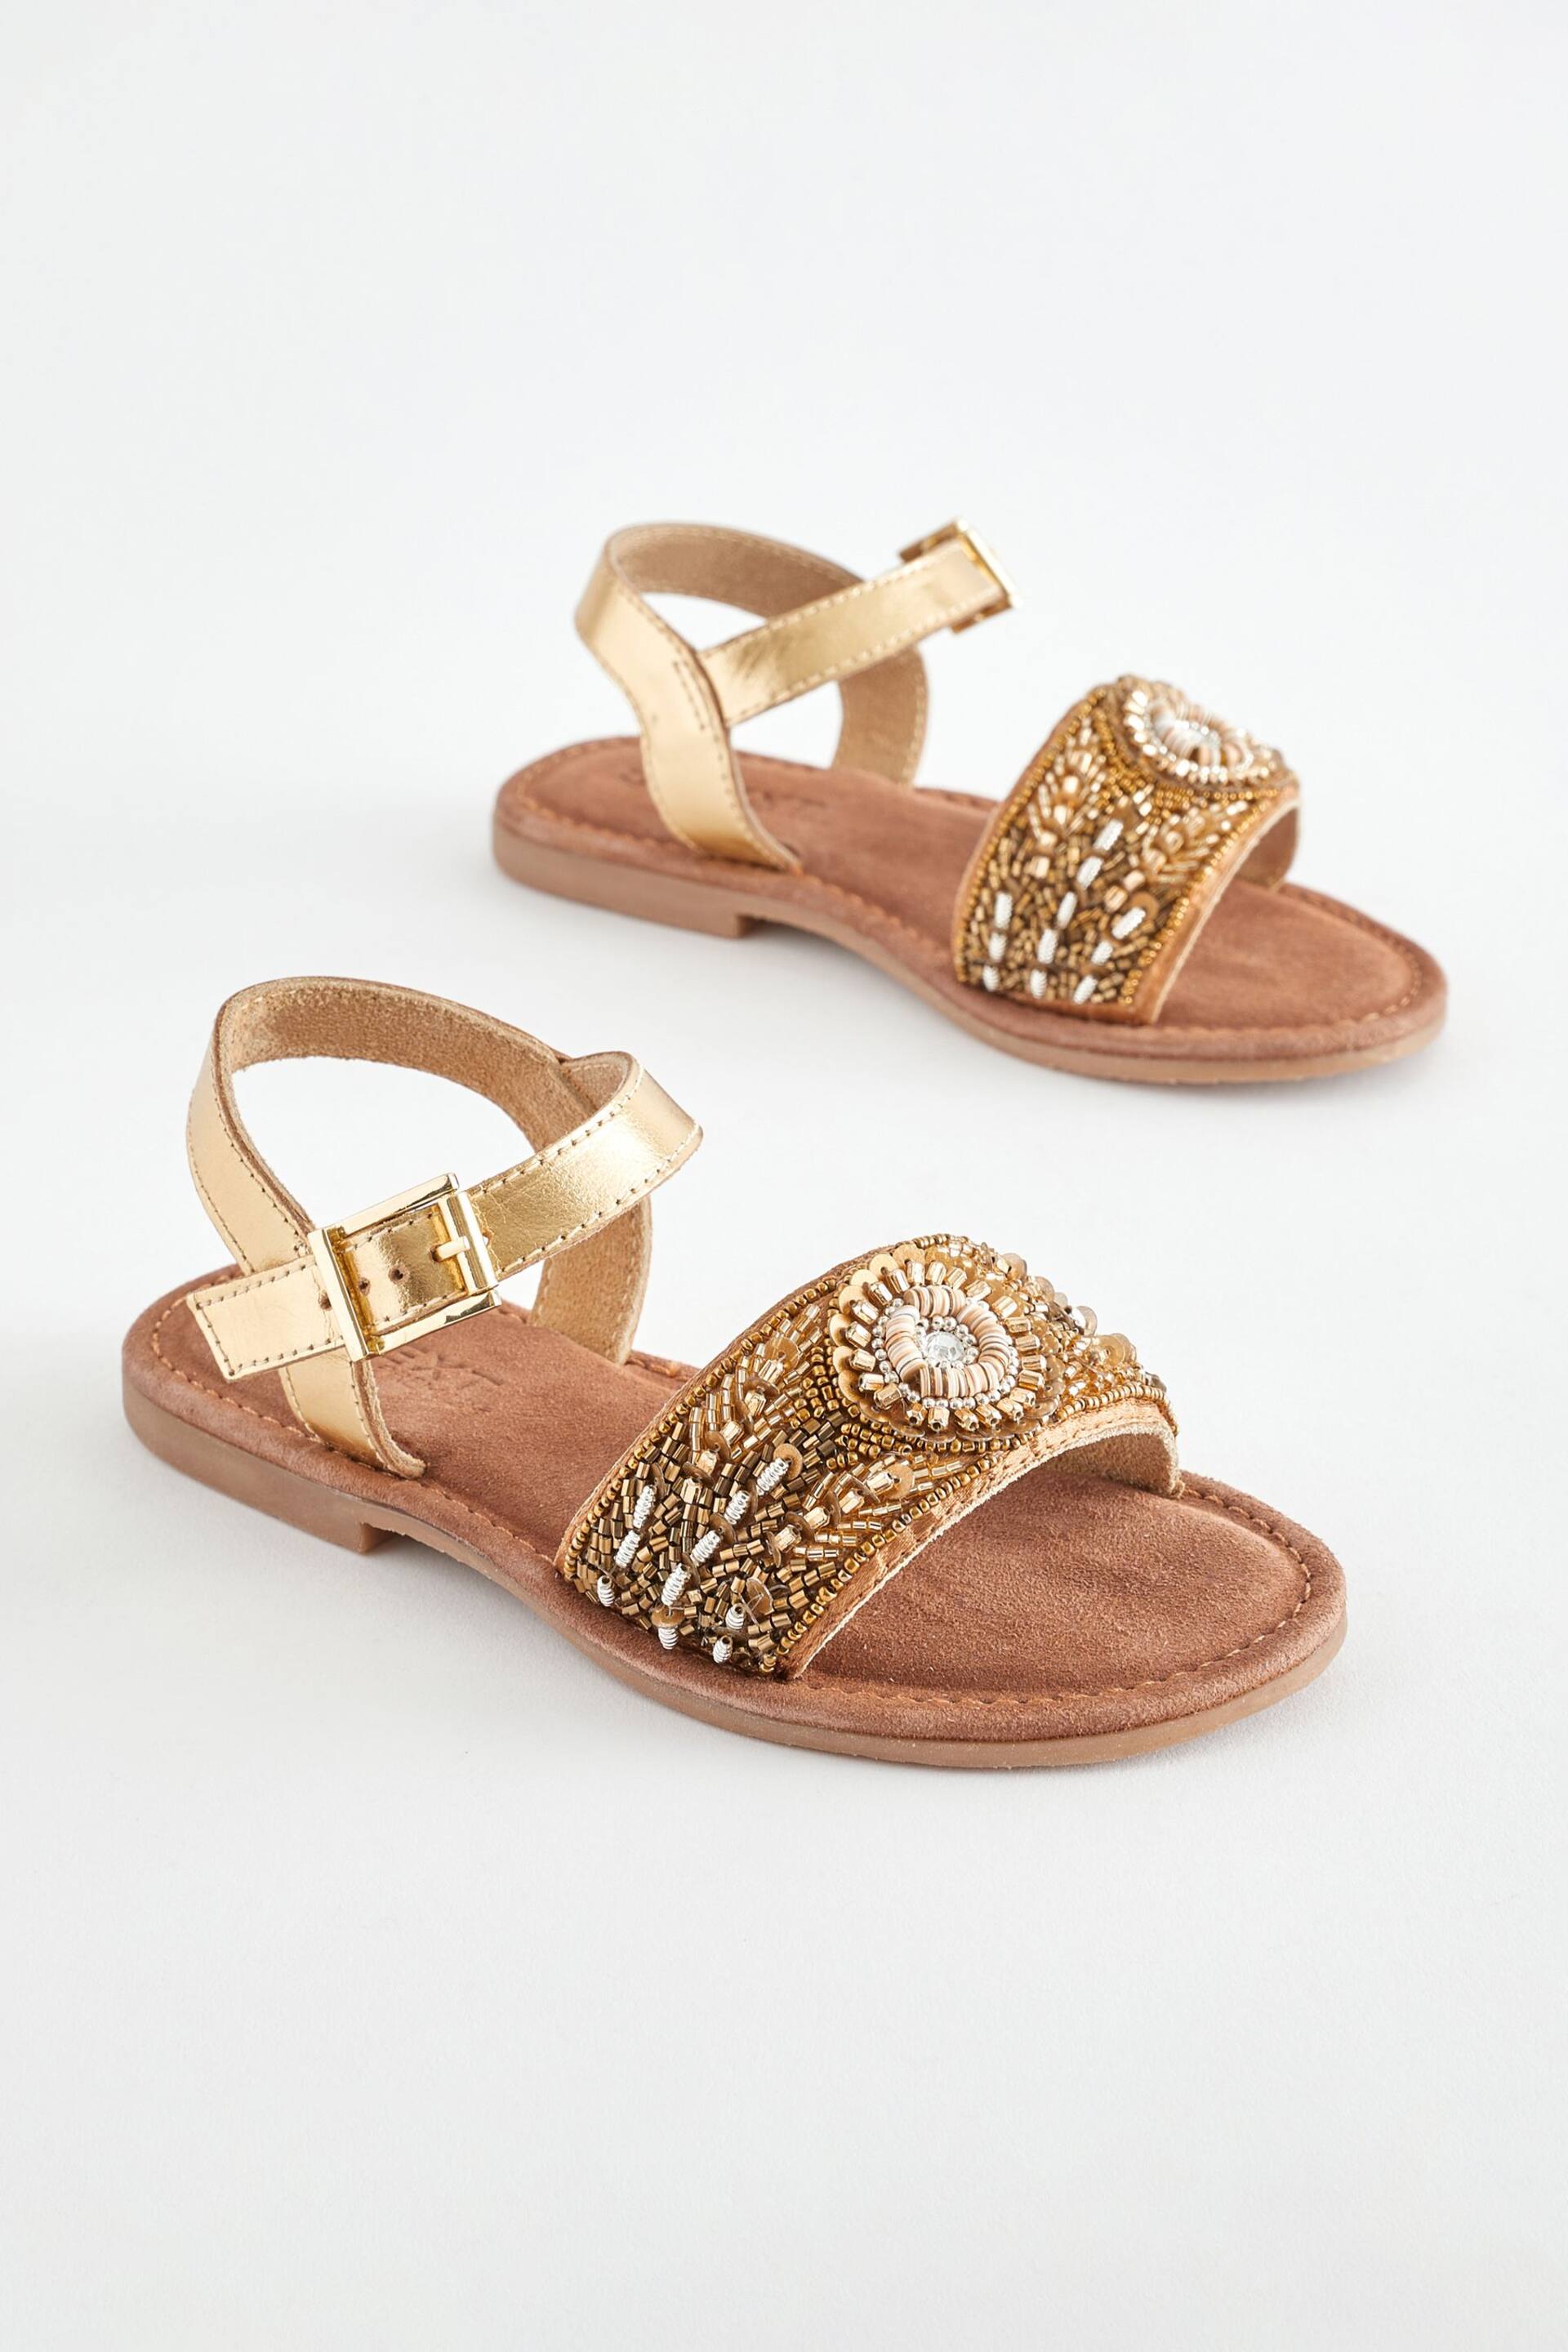 Gold Beaded Leather Occasion Sandals - Image 1 of 6